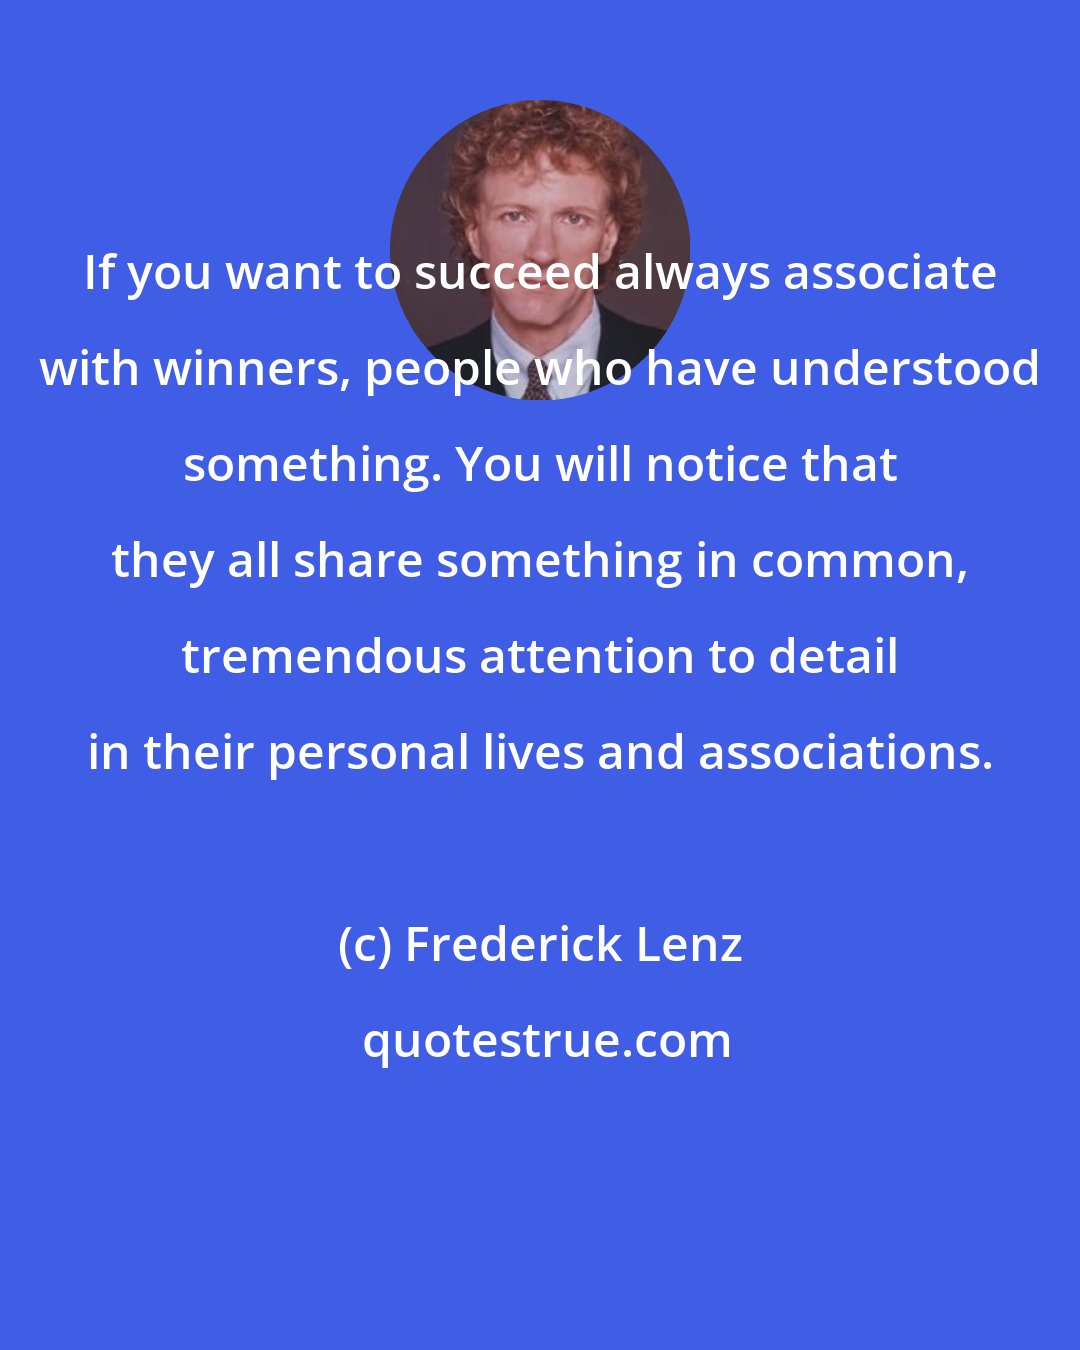 Frederick Lenz: If you want to succeed always associate with winners, people who have understood something. You will notice that they all share something in common, tremendous attention to detail in their personal lives and associations.